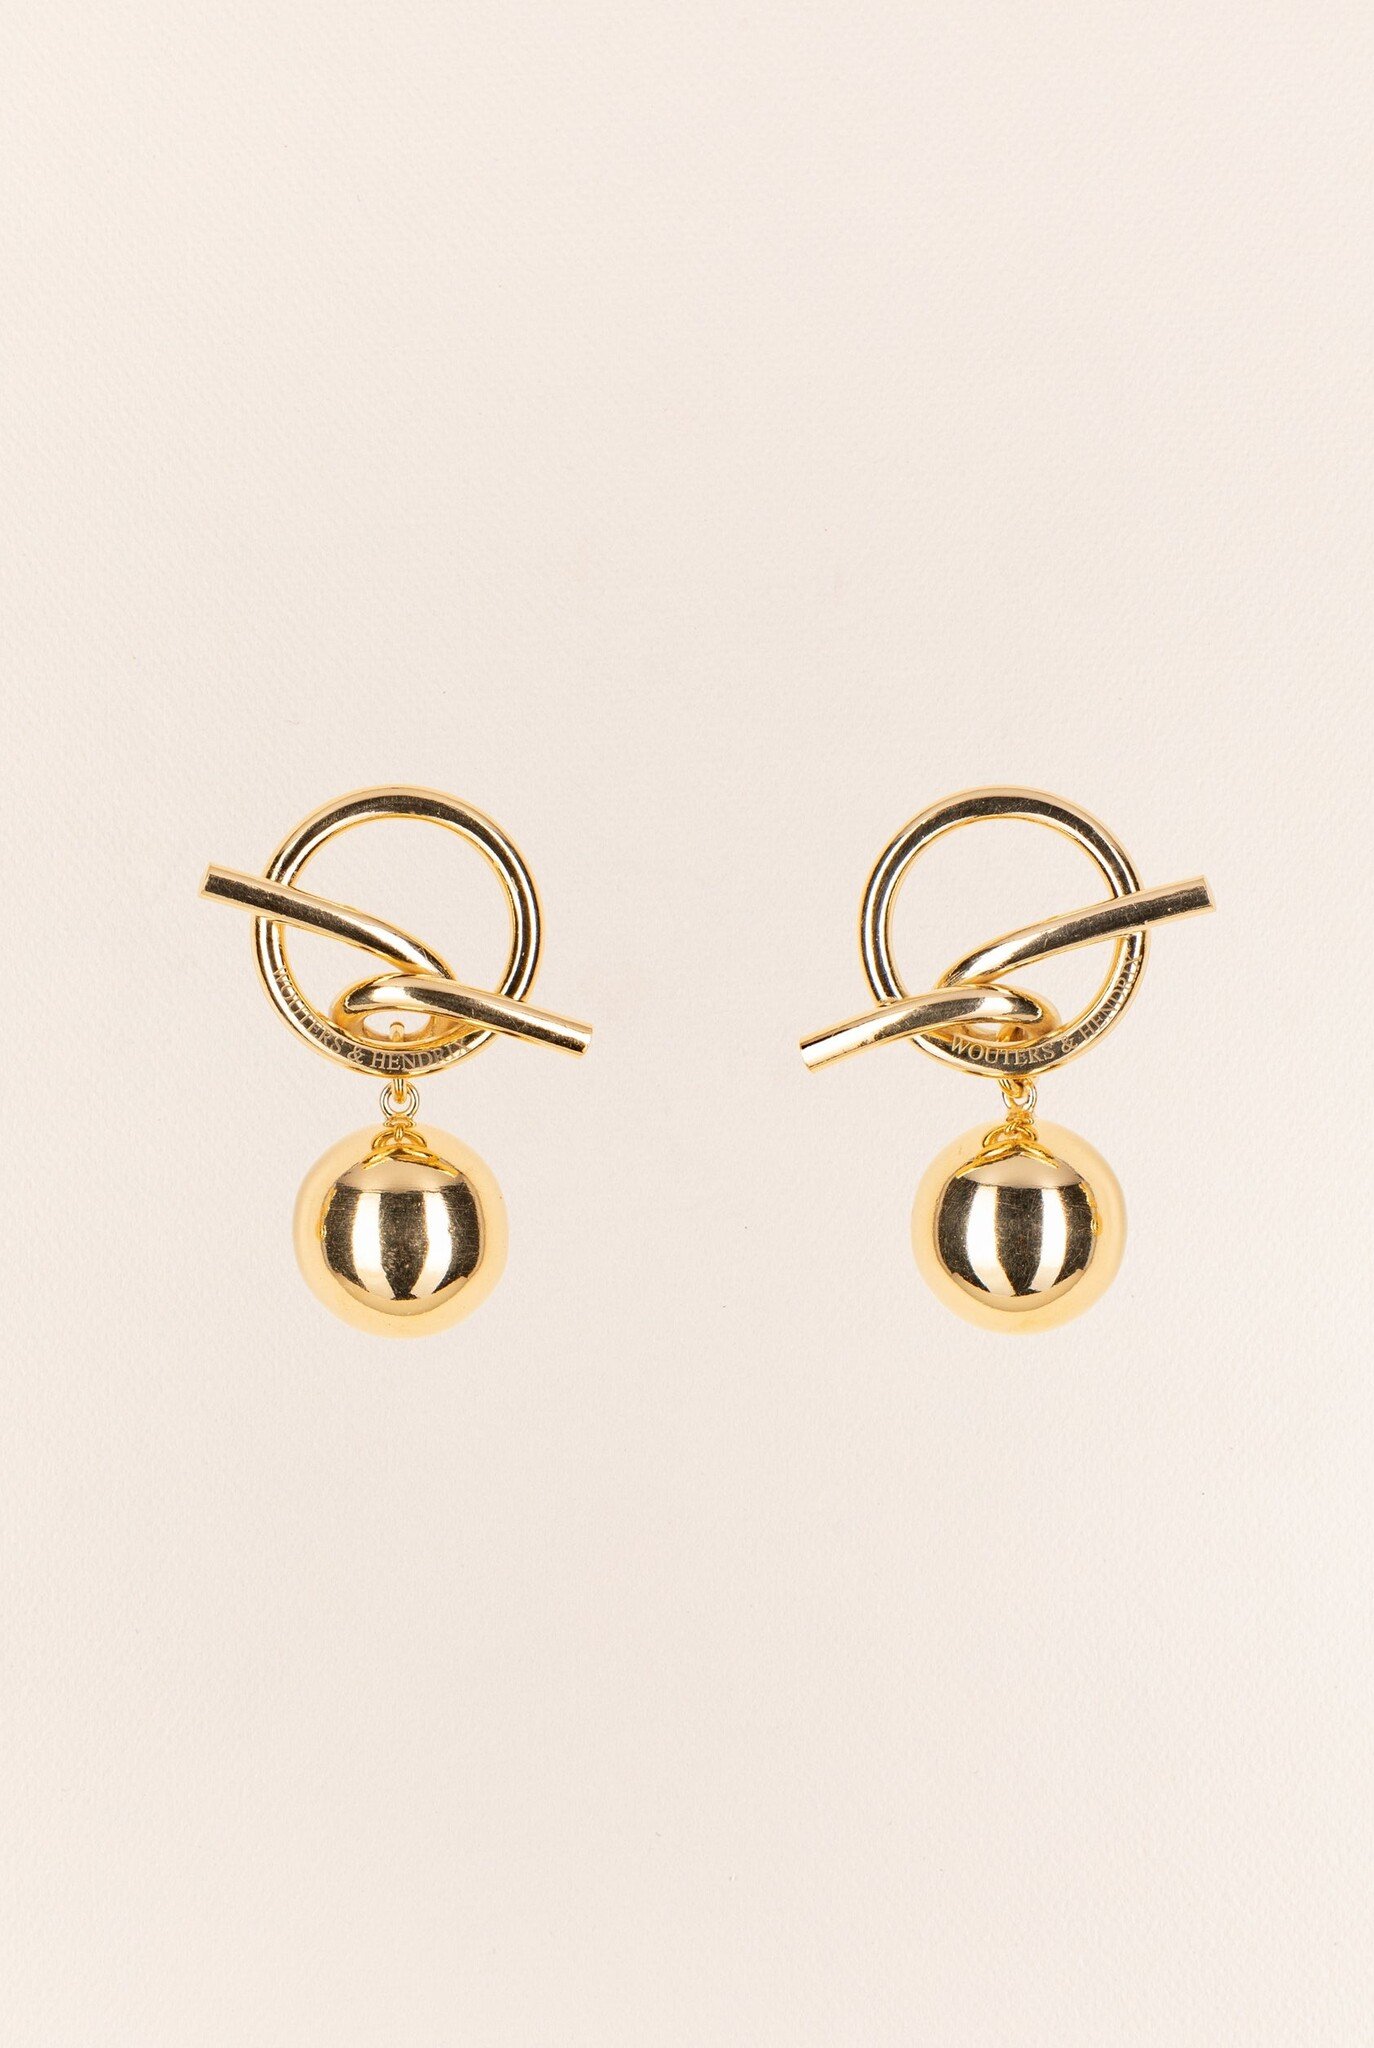 Pendant post earrings with T-bar and ball in gold-plated silver